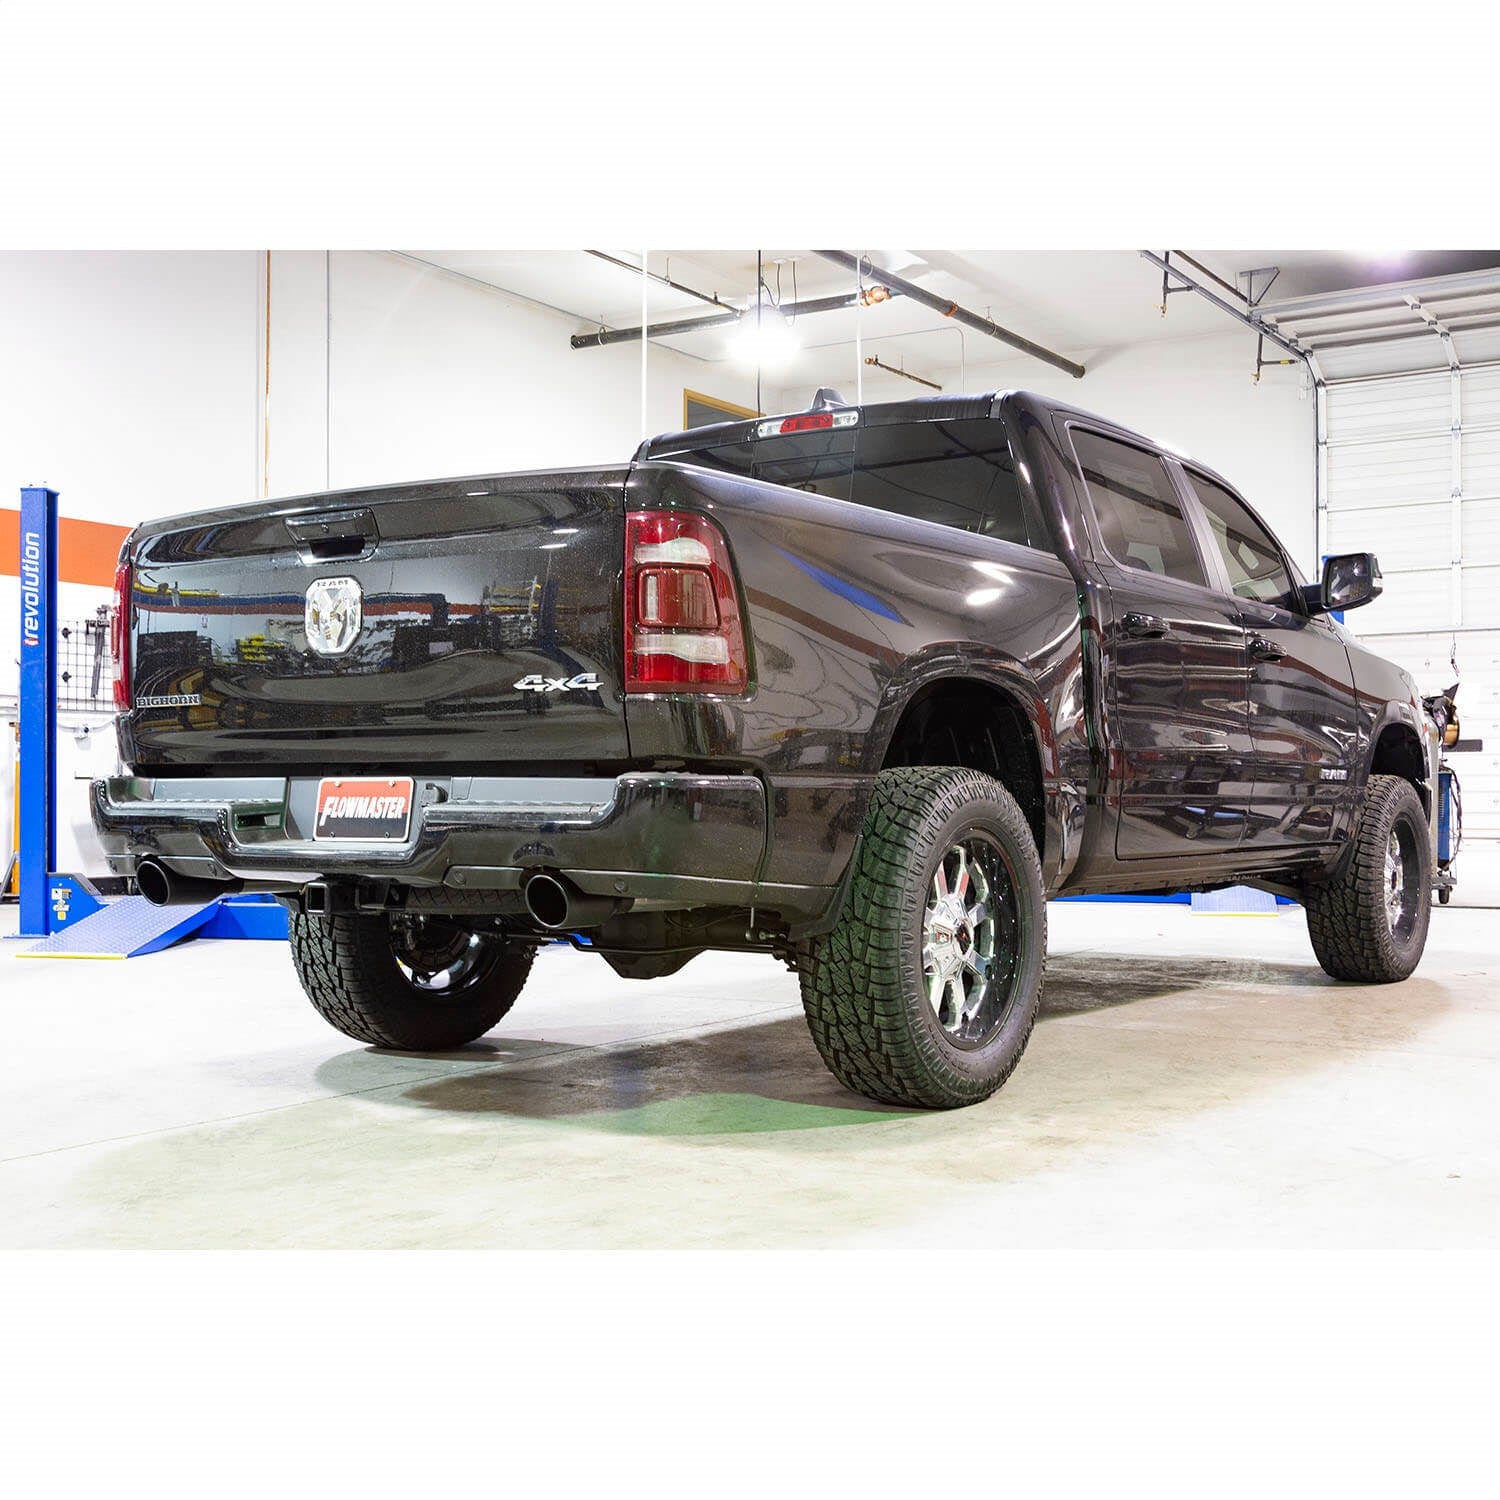 American Thunder Axle Back Exhaust System